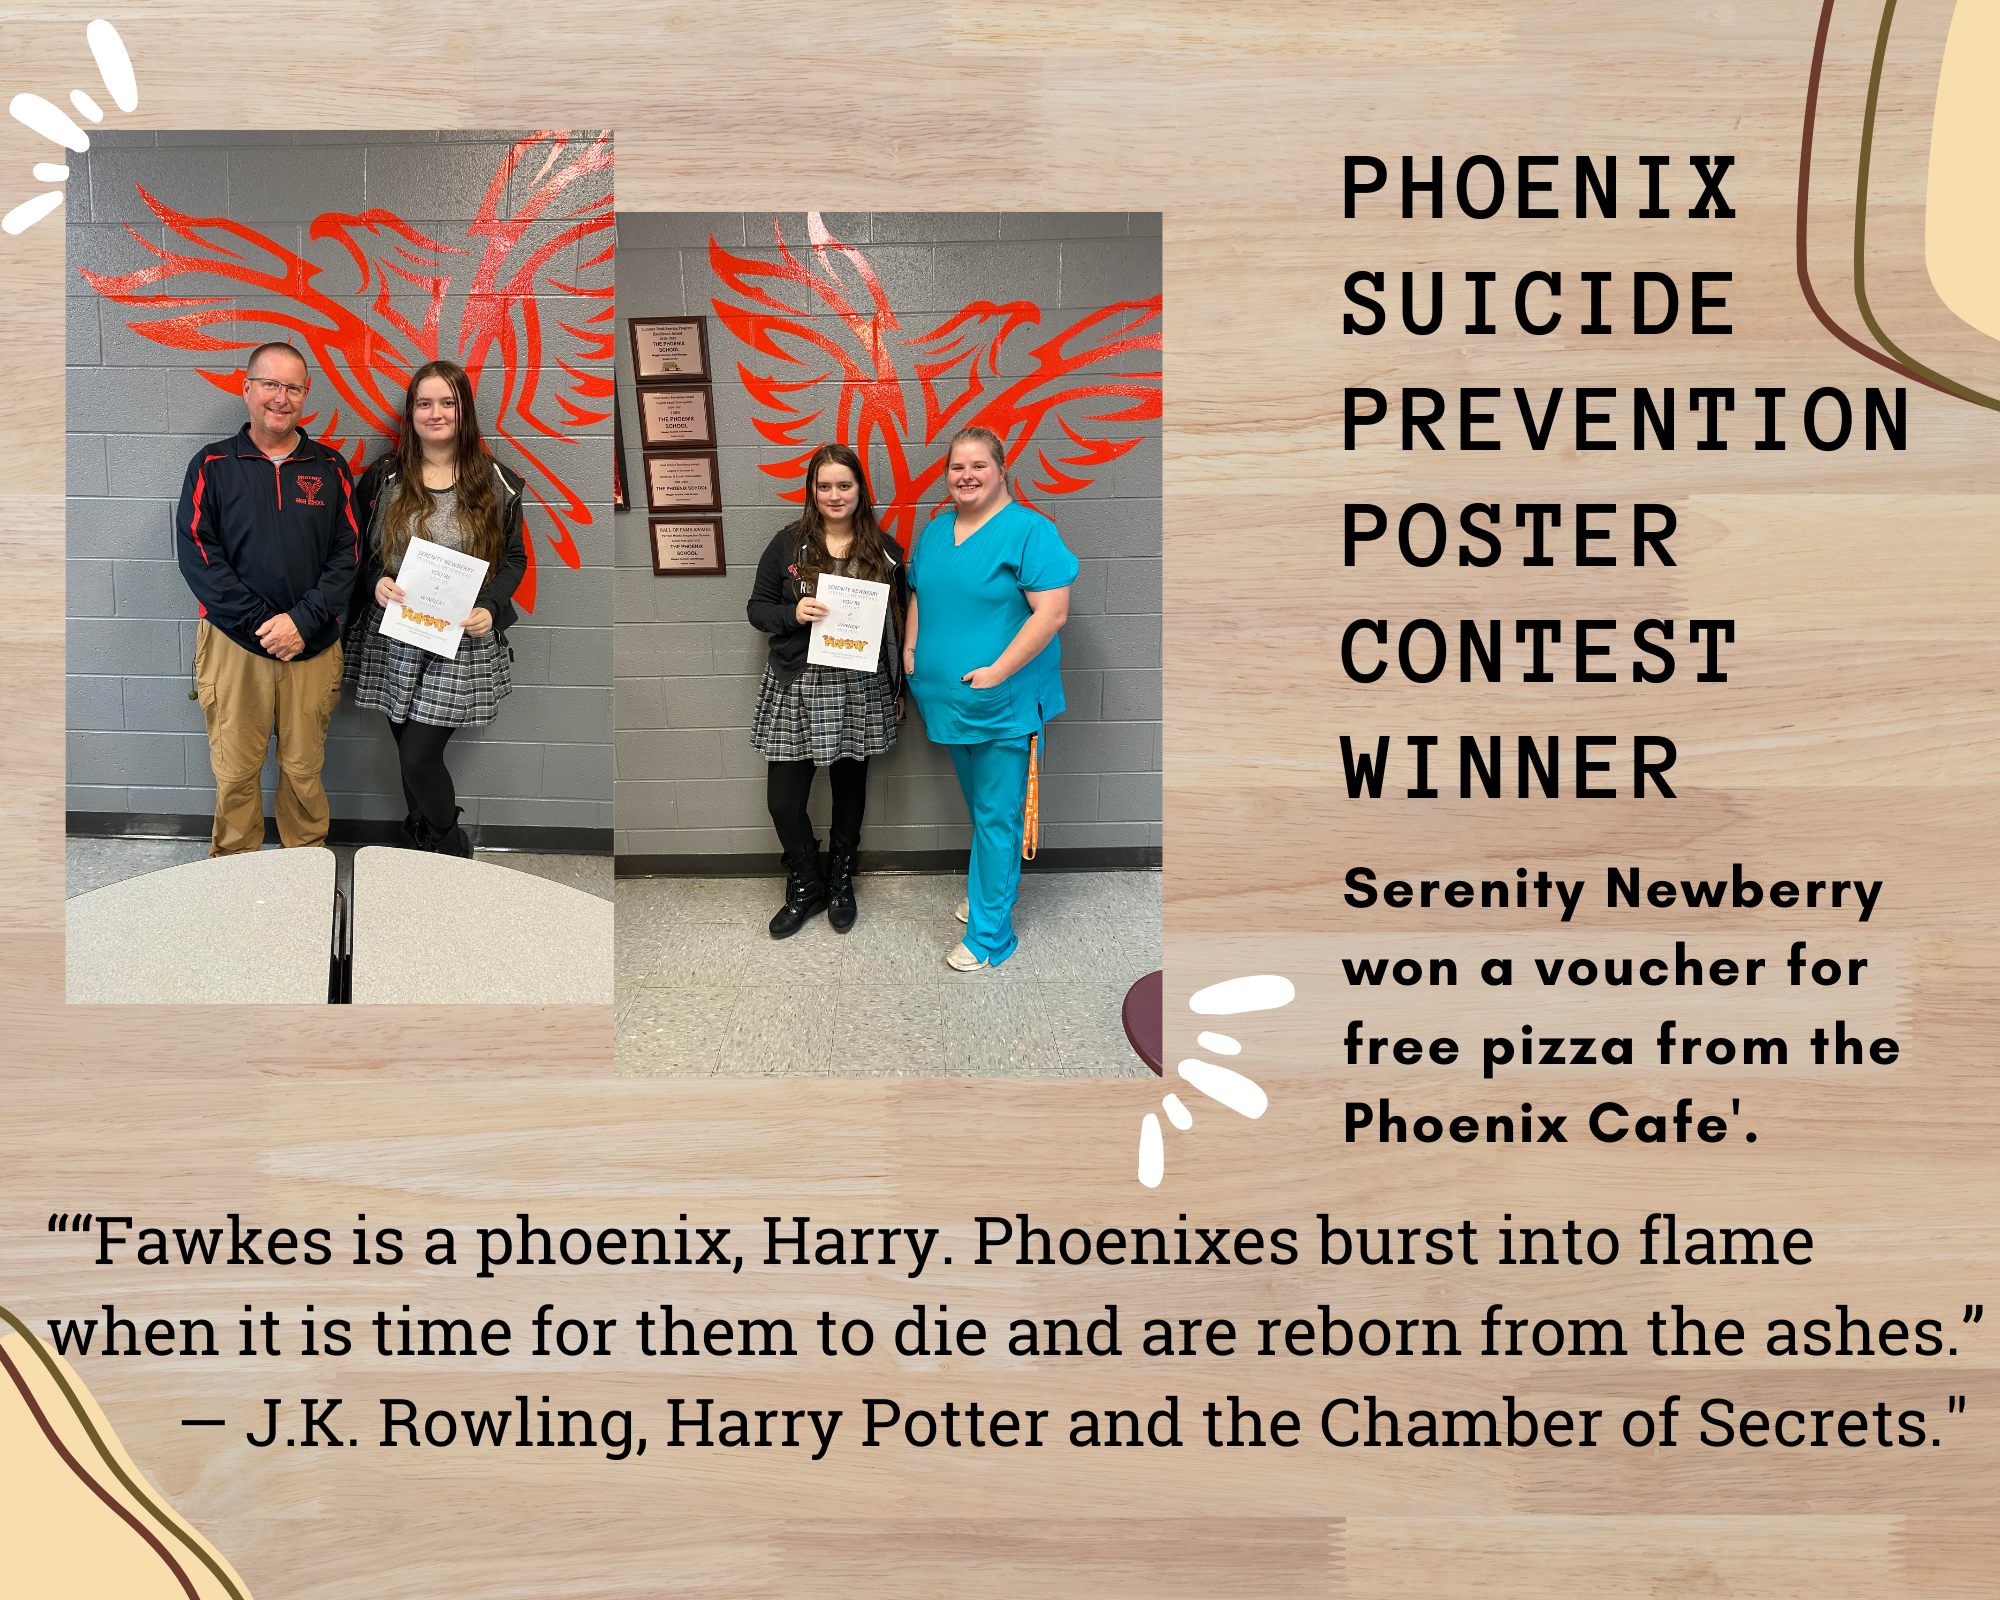 This is a picture of the winner of the suicide prevention poster contest winner.